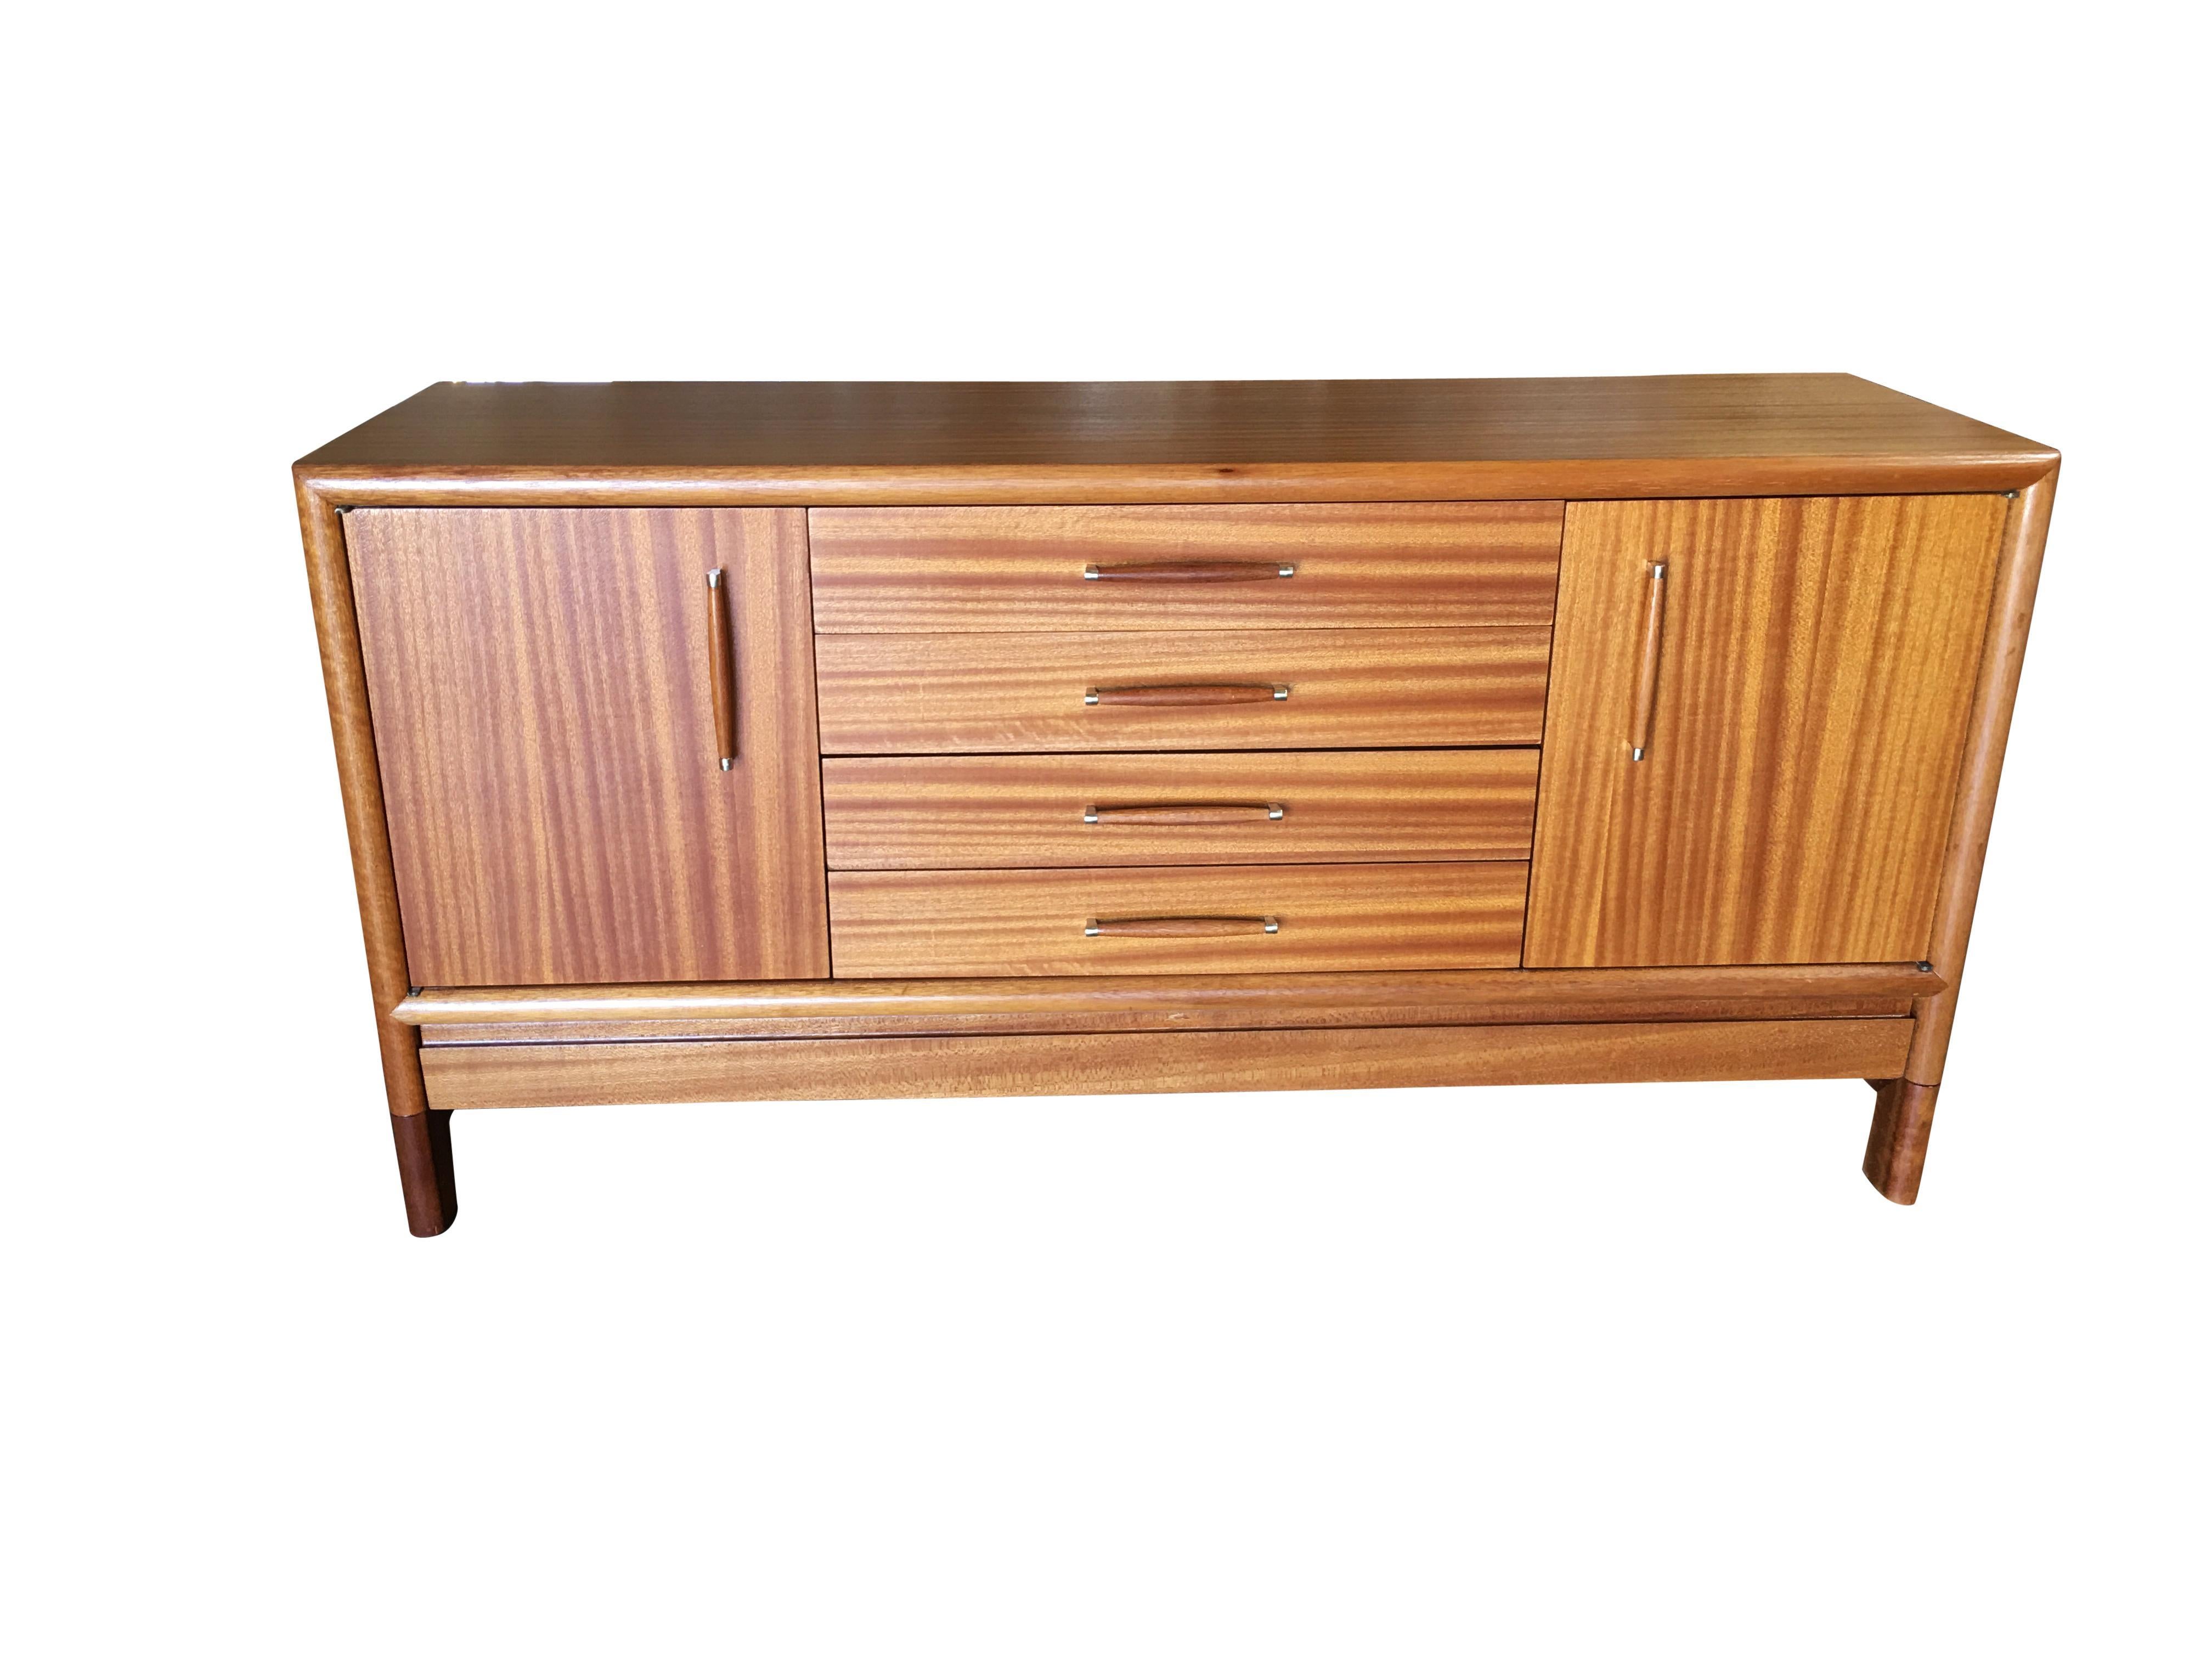 Modernist walnut buffet/credenza by John Keal for Brown Saltman. The buffet features two single door cubby spaces on each side of a four-drawer cluster all with custom made brass and walnut handles. Special to this piece is a secret hidden cabinet